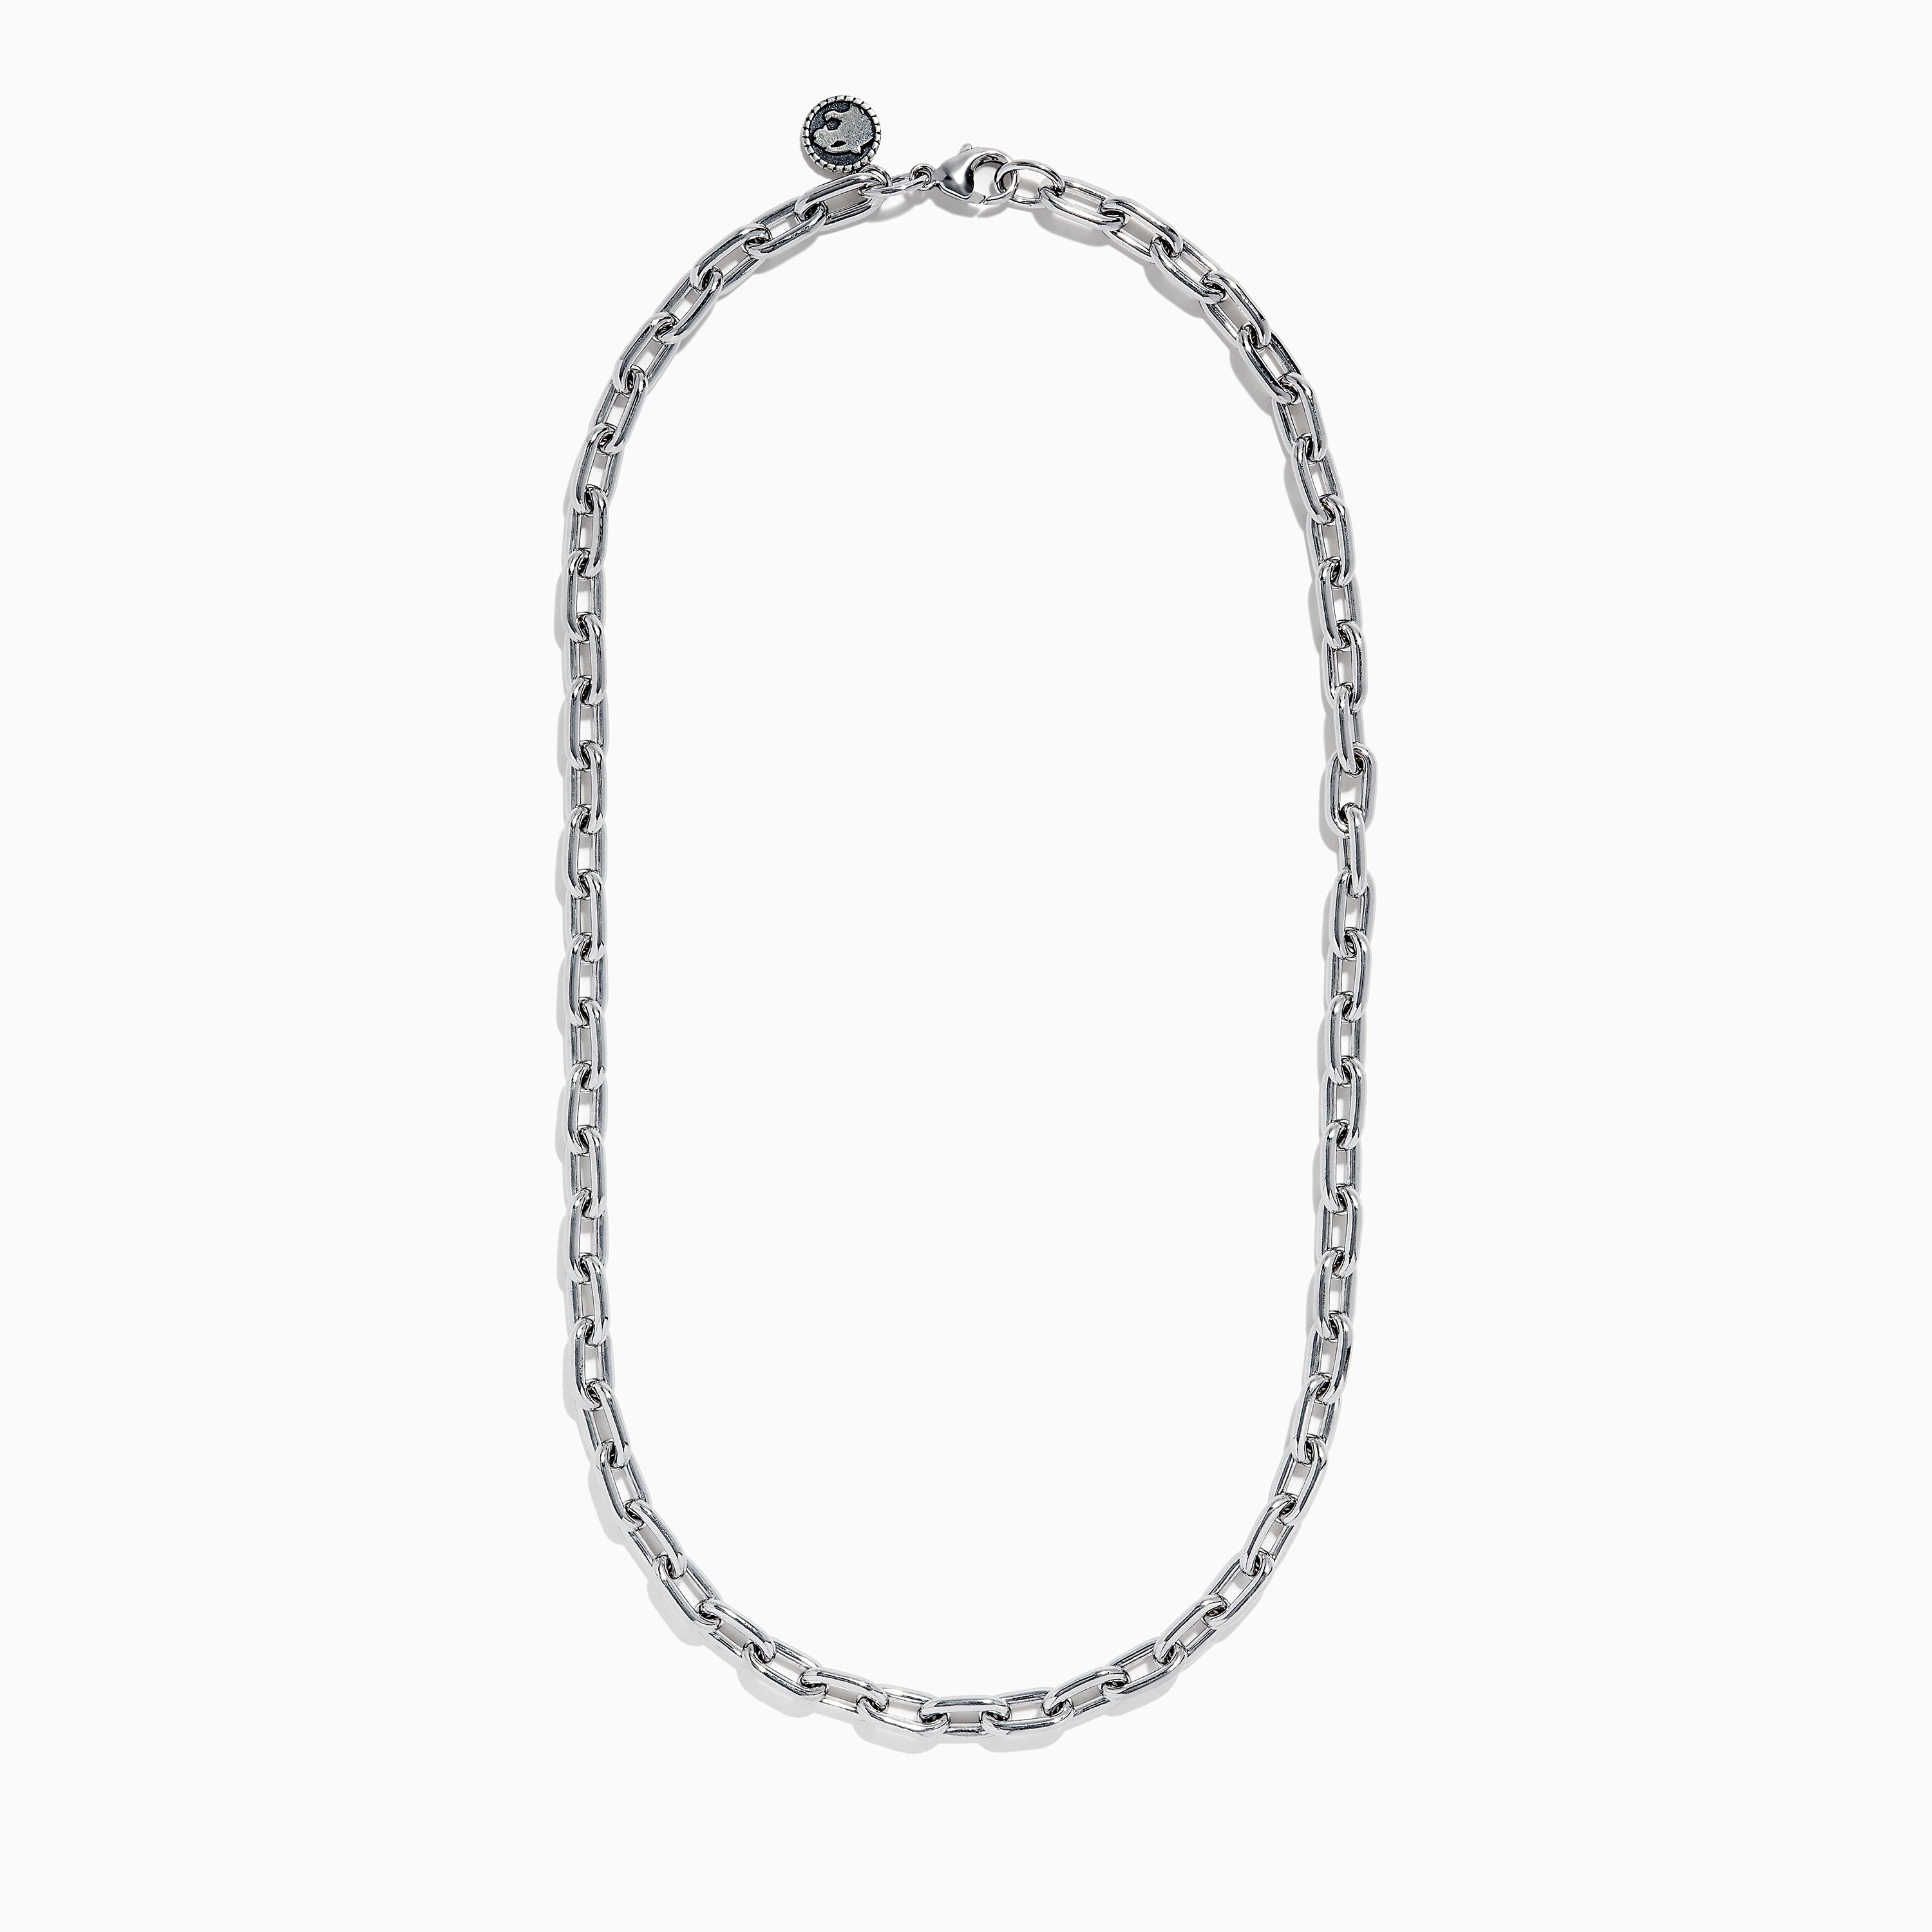 Effy Men's 925 Sterling Silver Paperchain Necklace